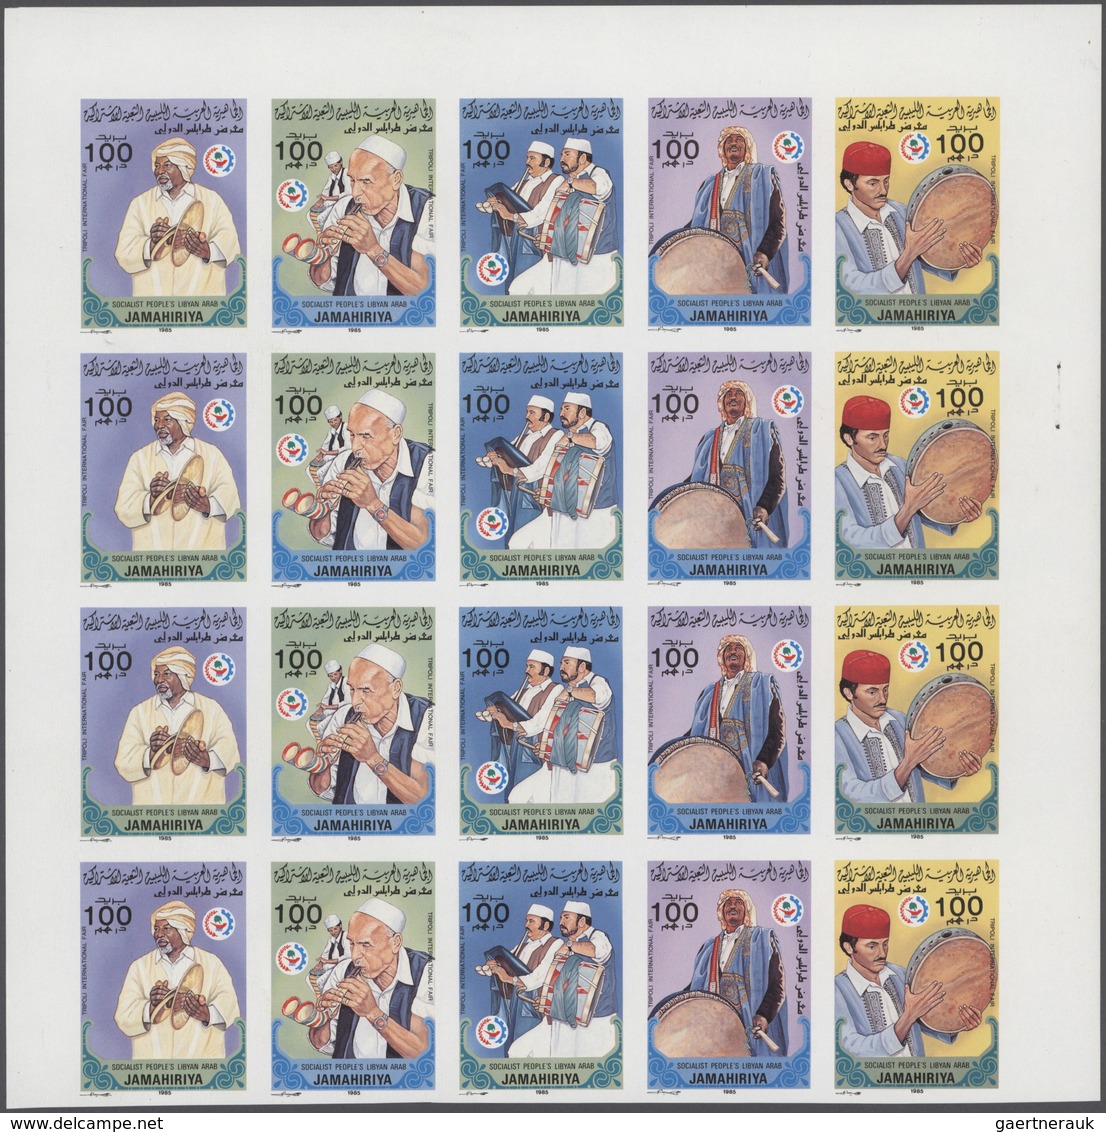 Thematische Philatelie: 1960s/2000s (approx), Africa. Lot contains imperforate stamps as issued and